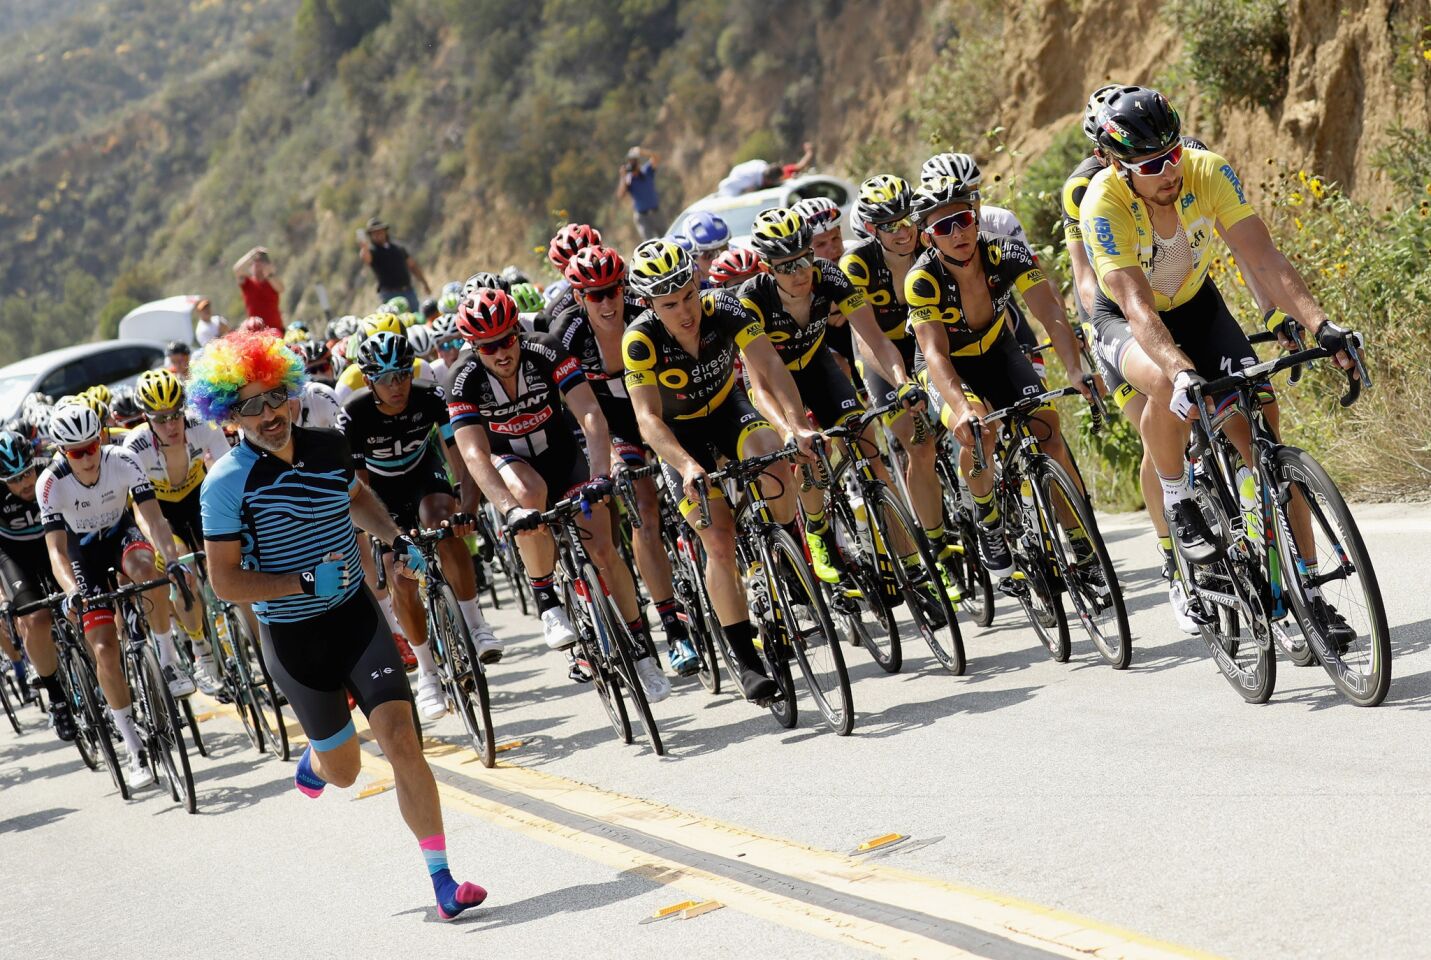 Peter Sagan (yellow jersey) rides in the peloton not far from a fan running down the road during the second stage of the Amgen Tour of California on May 16.